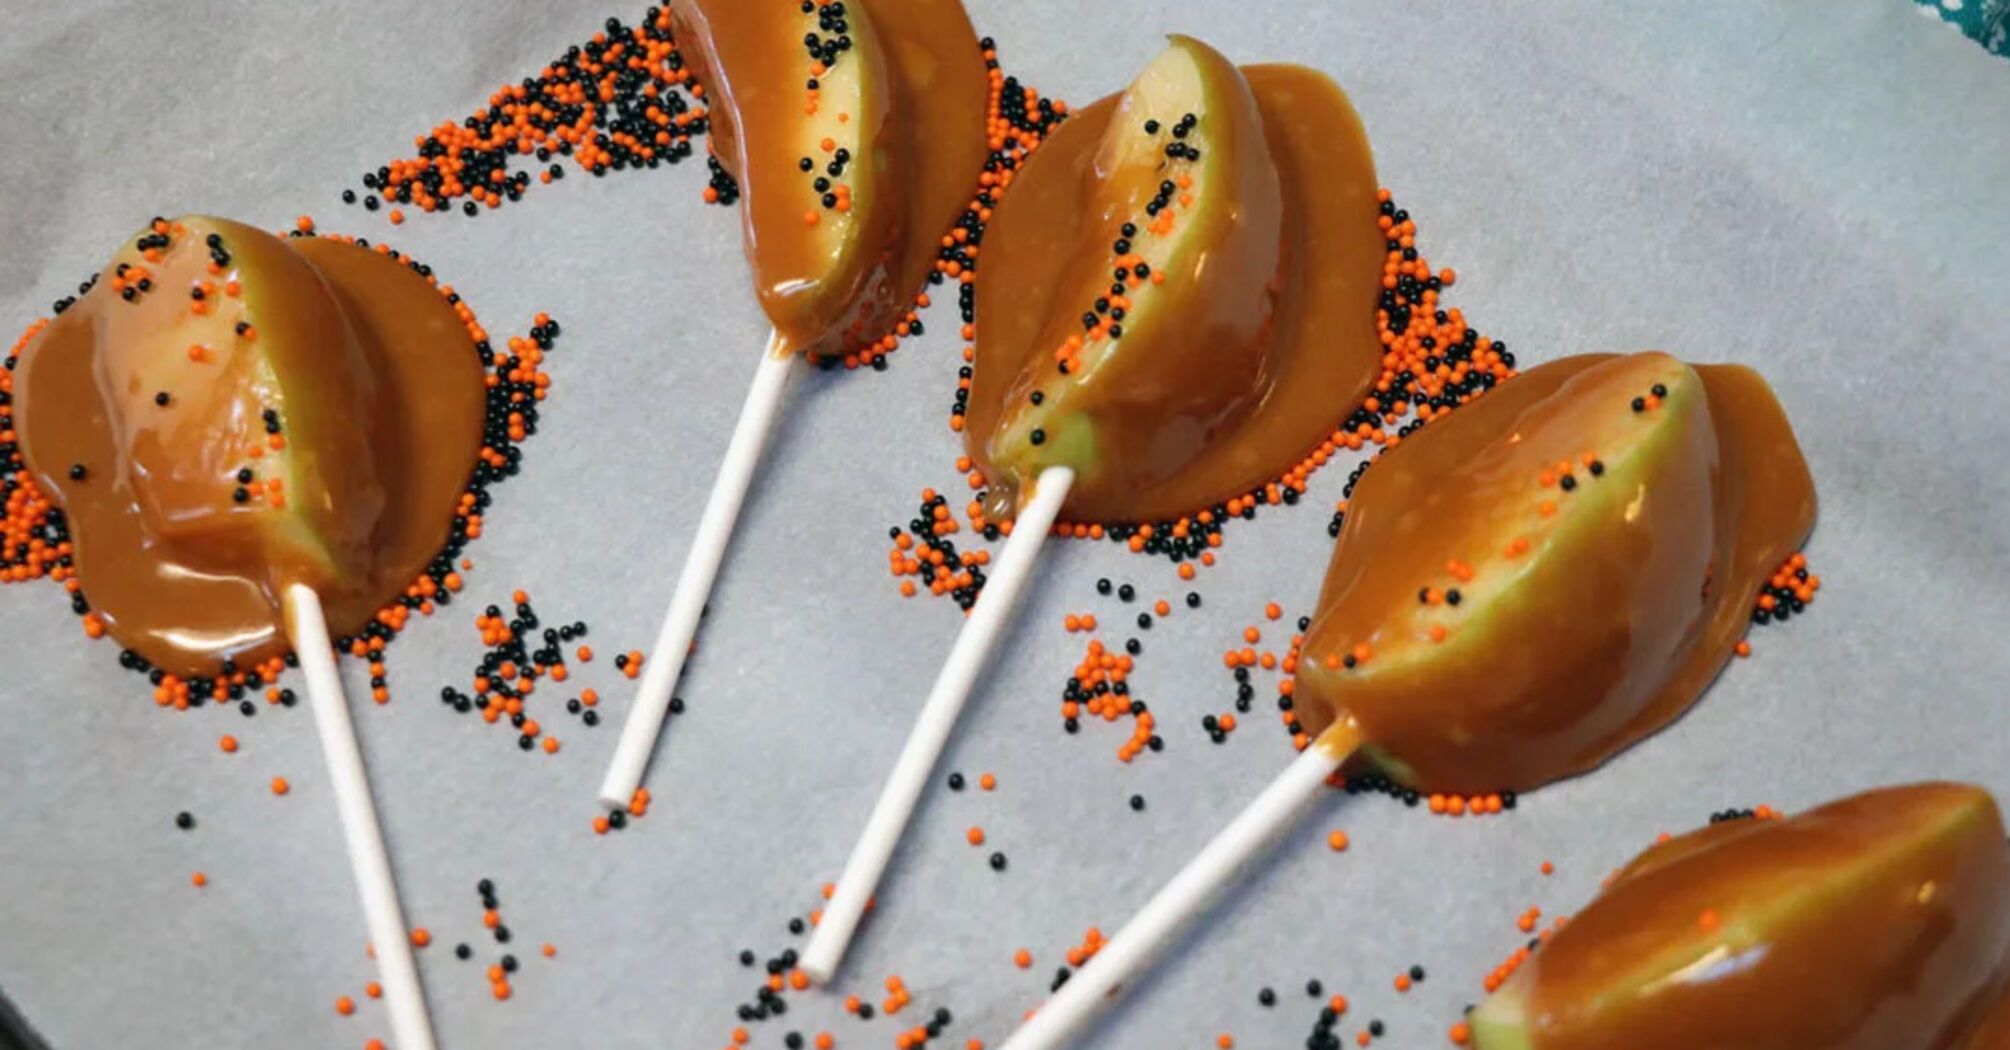 How to cook caramel apple slices